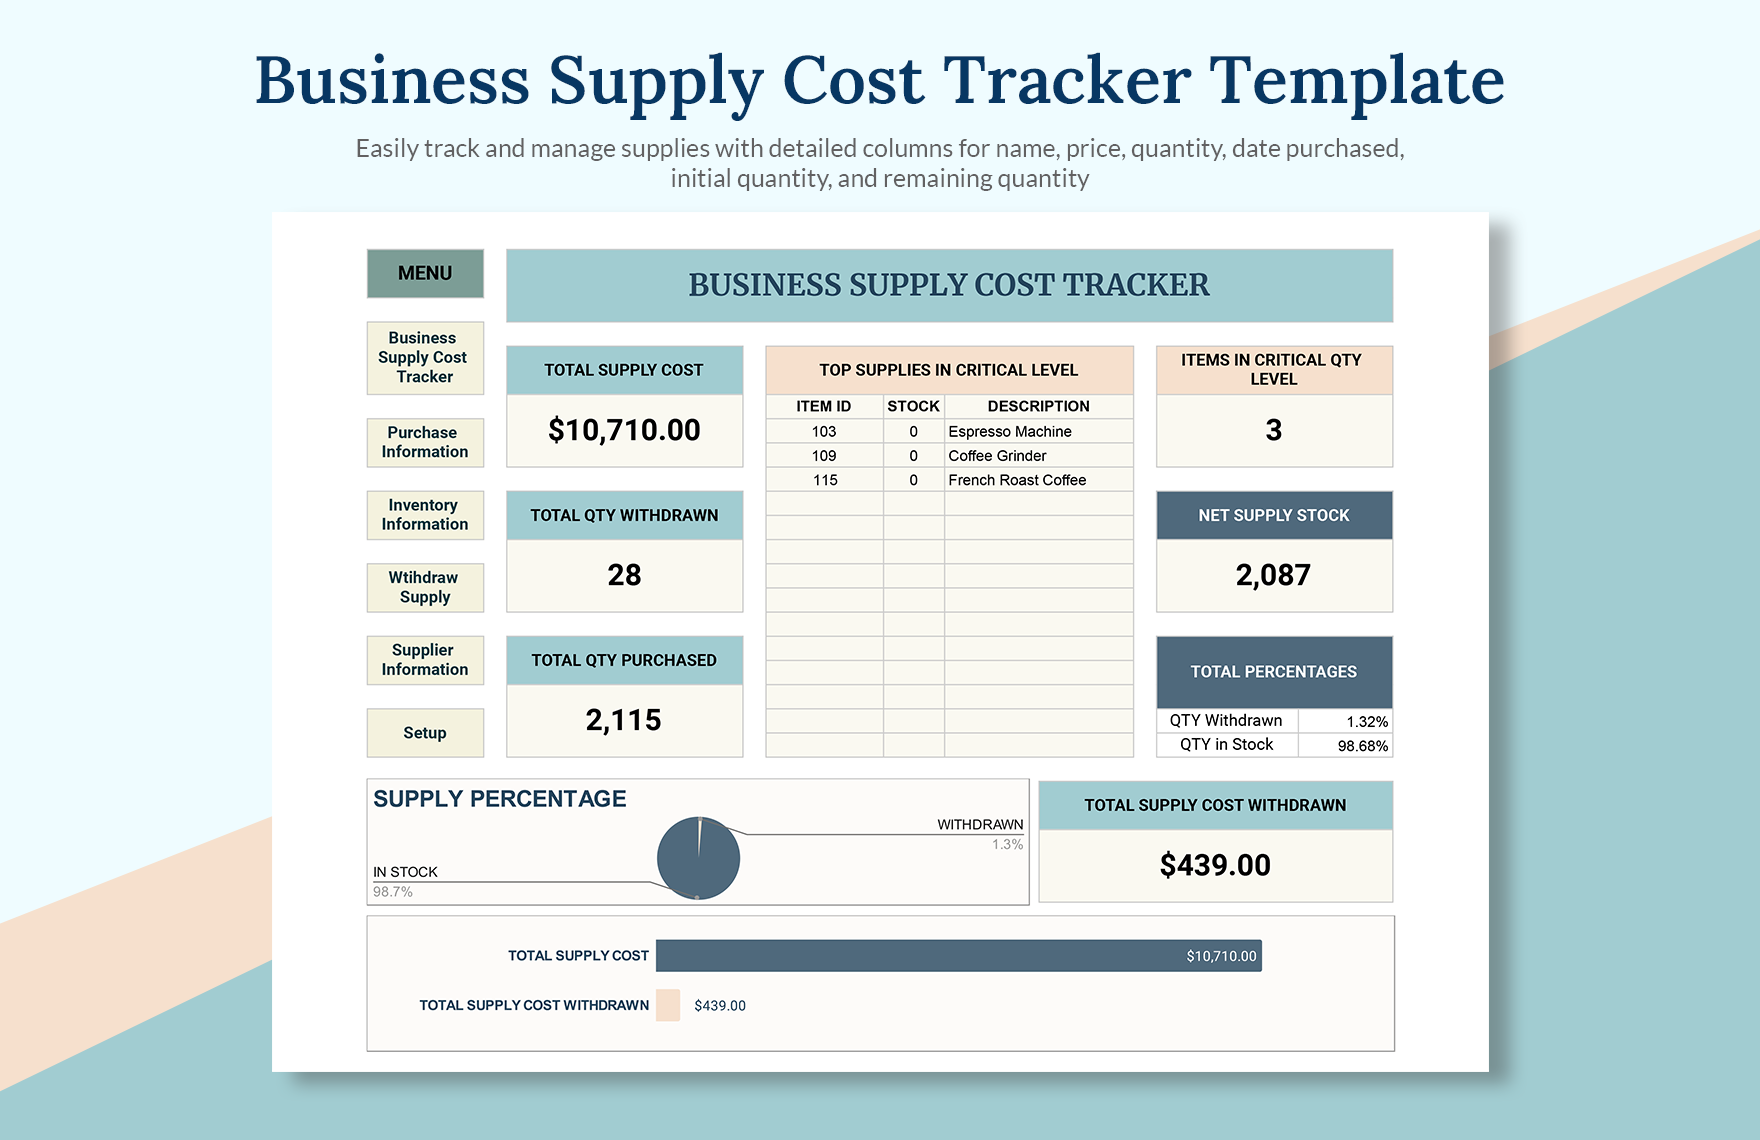 Business Supply Cost Tracker Template